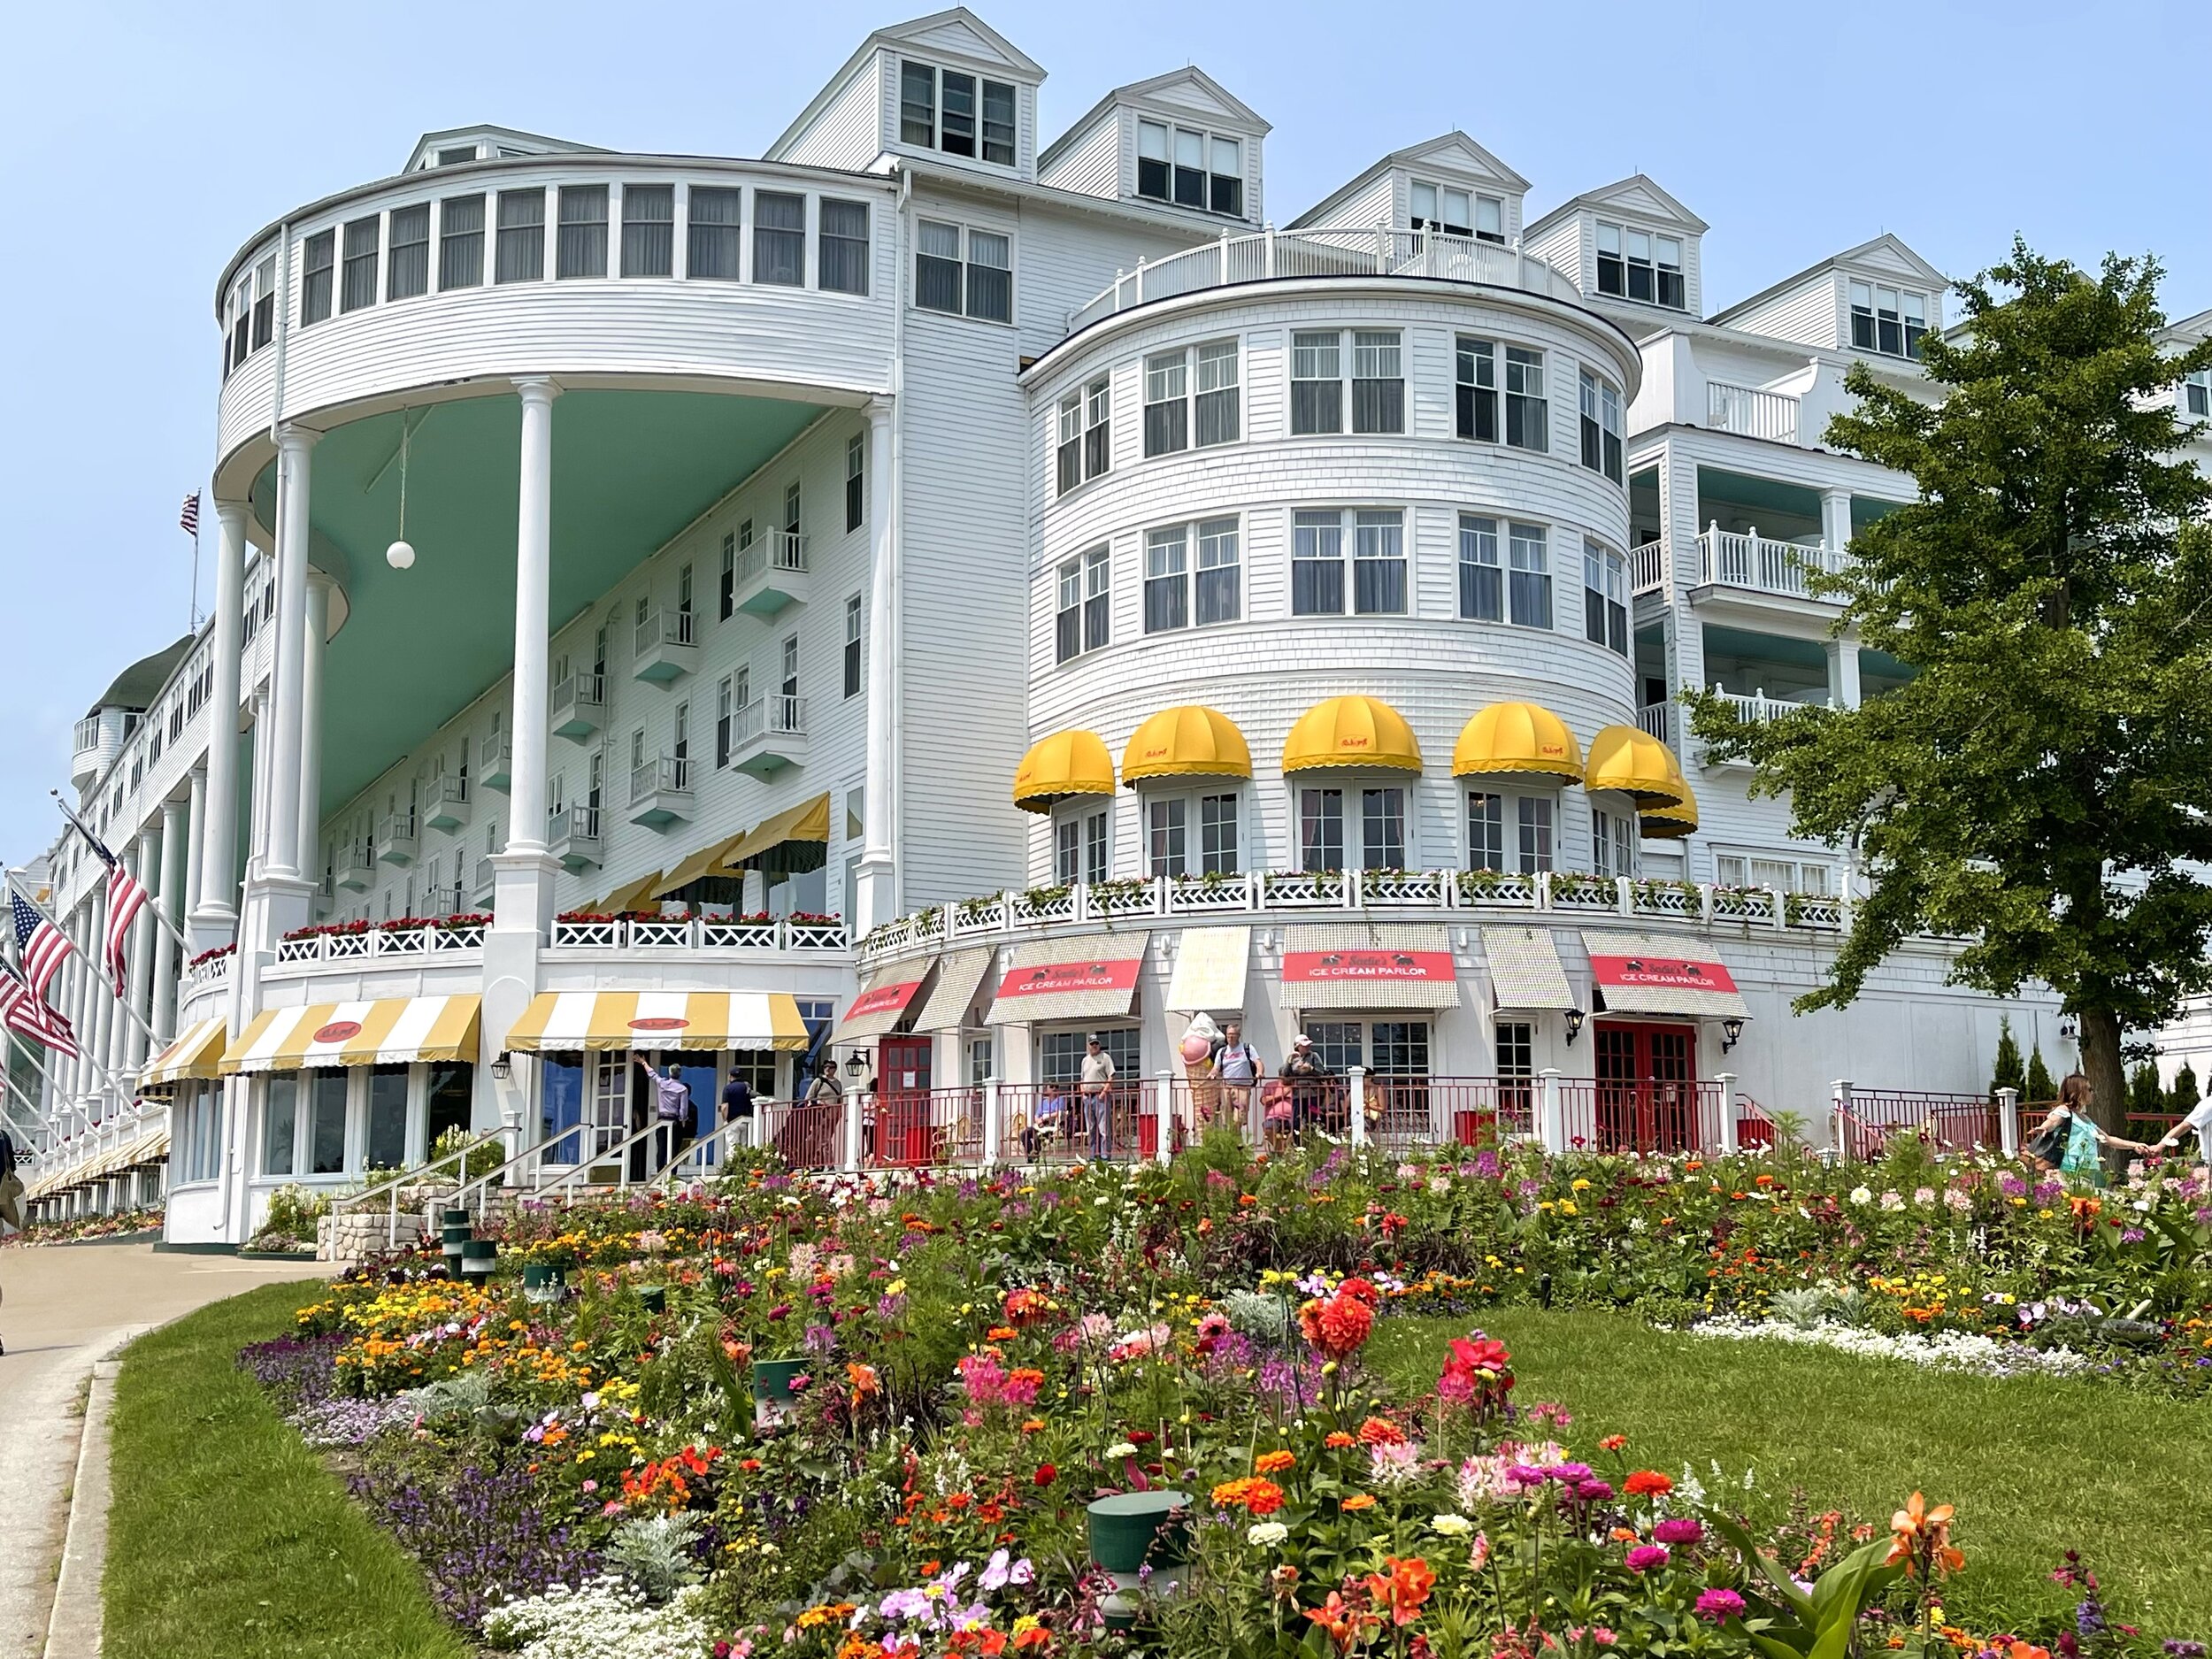   The Grand Hotel,  the most prominent feature on Mackinac Island, is grand indeed. Five US presidents, Thomas Edison, Mark Twain, and countless other notables have stayed here since the doors opened in 1887. The hotel became a family-run business in